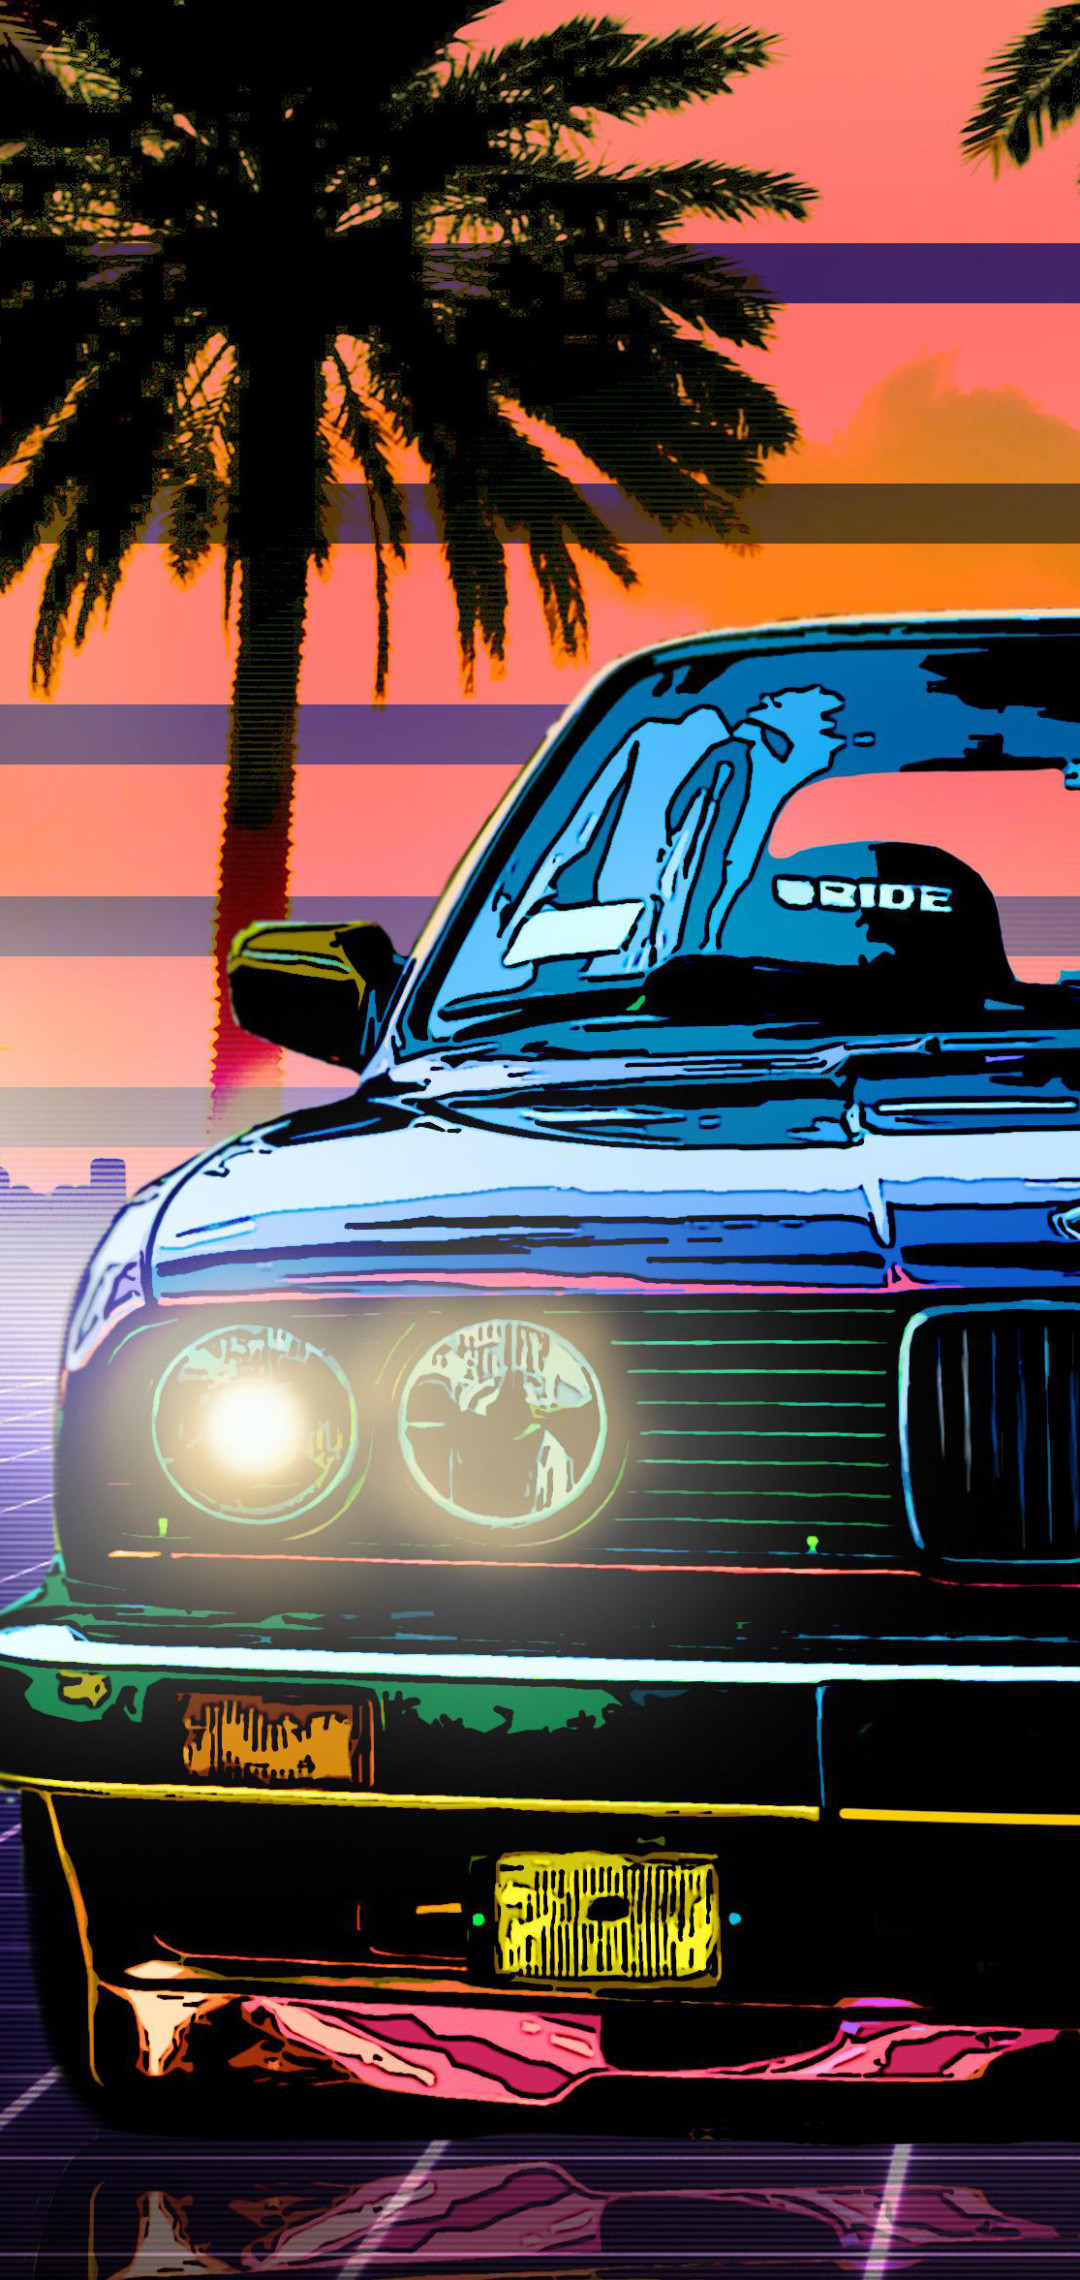 Bmw E30 Wallpaper 4k 1080x2280 Wallpaper Teahub Io We have a massive amount of hd images that will make your computer or smartphone. bmw e30 wallpaper 4k 1080x2280